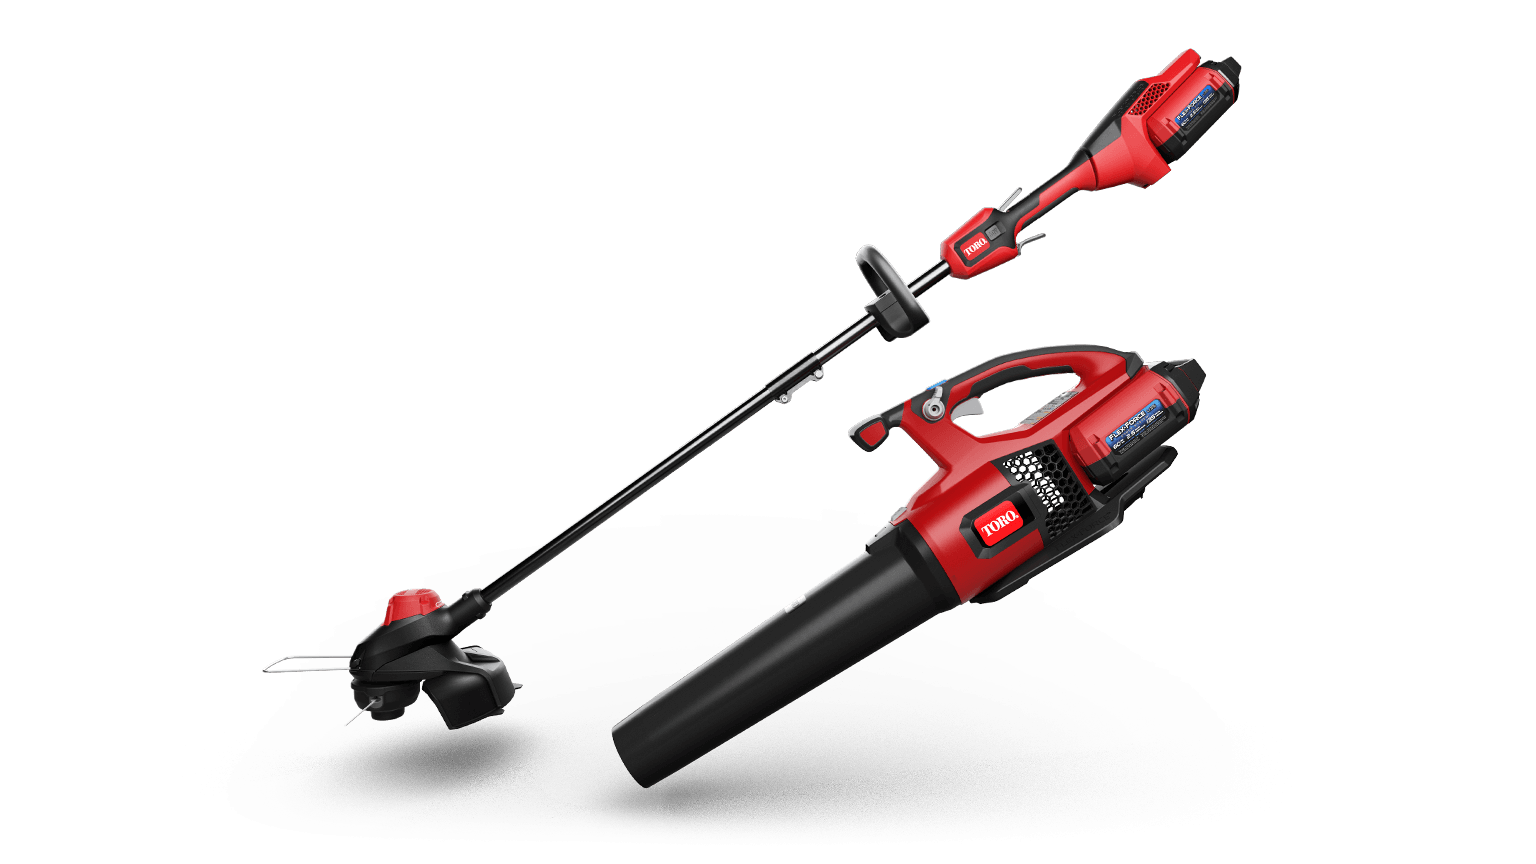 Toro Flex Force 60V Trimmer and Leaf Blower Combo Kit 51881 from Toro -  Acme Tools